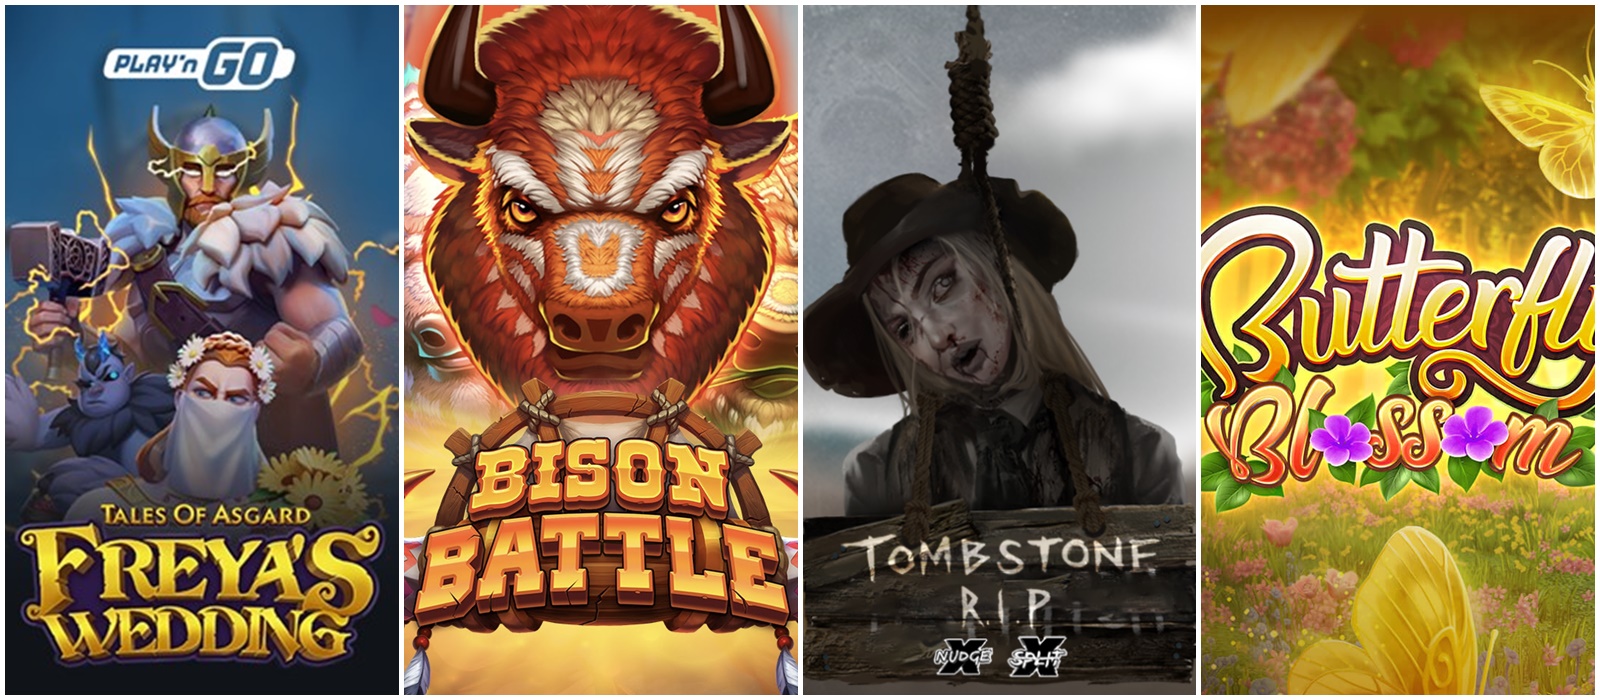 Dr.Casinoが推薦する4月の4つの人気スロットゲームーTALES OF ASGARD: FREYA'S WEDDING、BISON BATTLE、Tombstone R.I.P、Butterfly Blossom